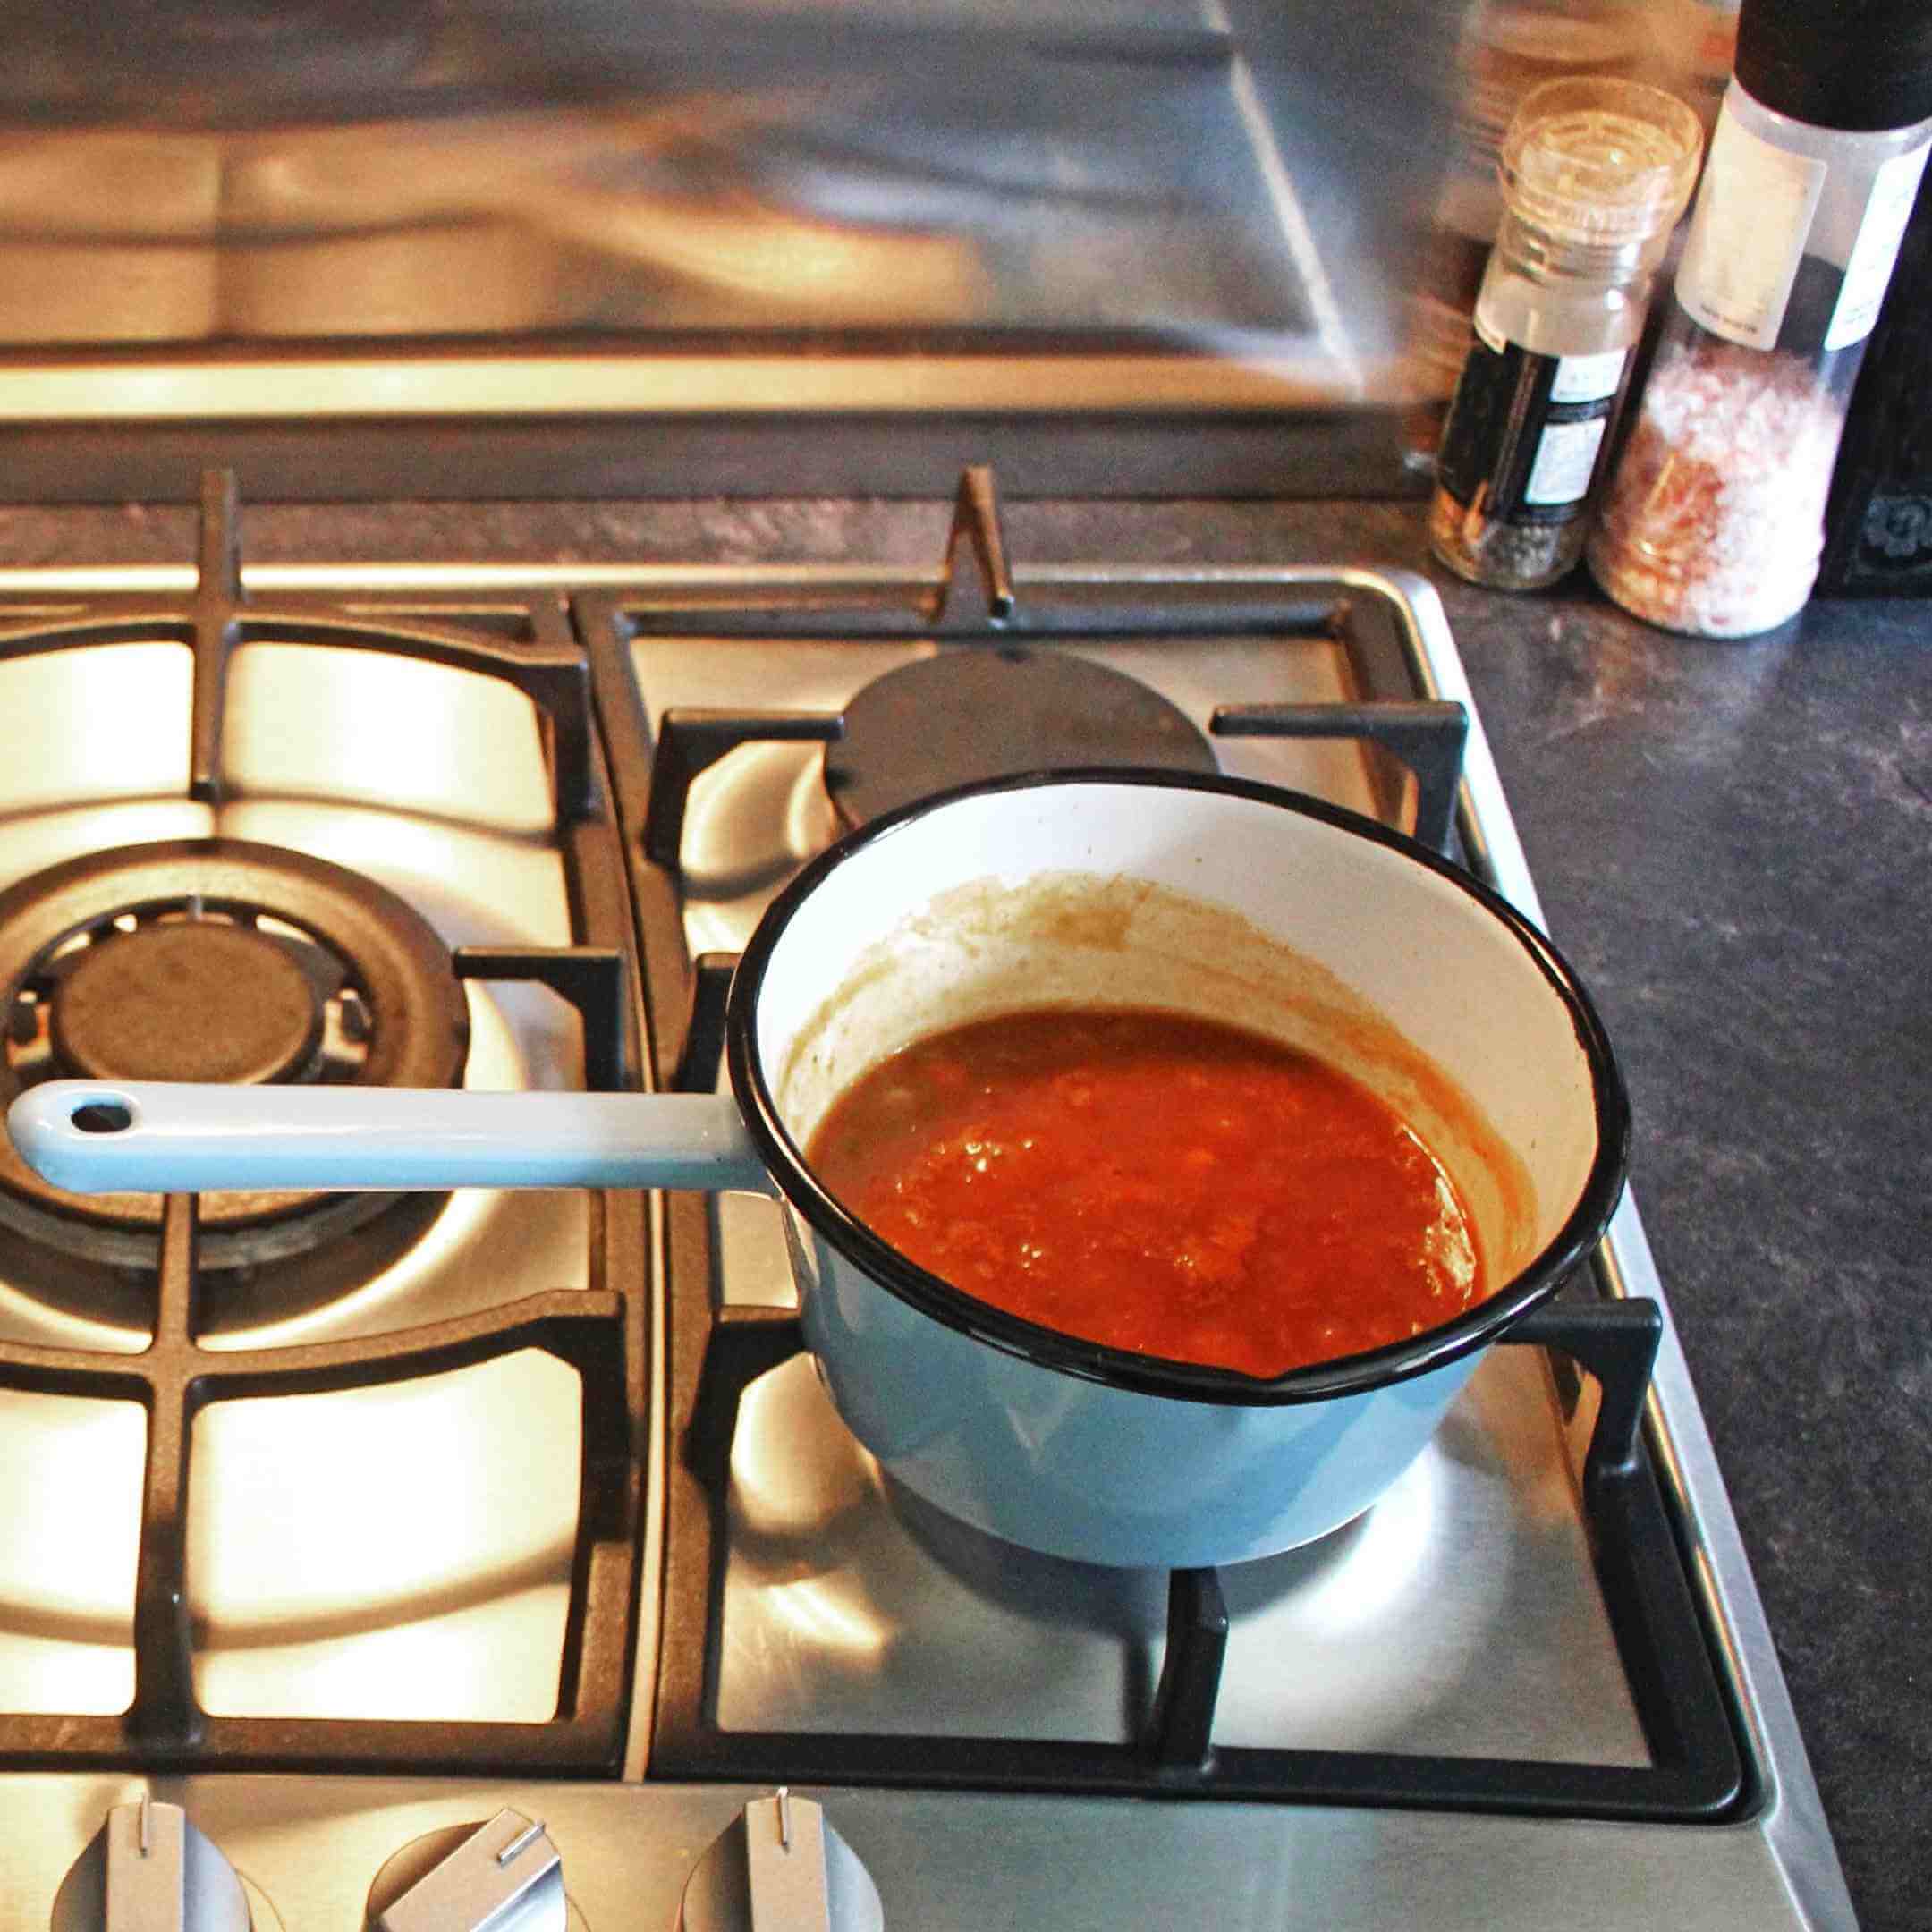 warming up canned soup on the stovetop